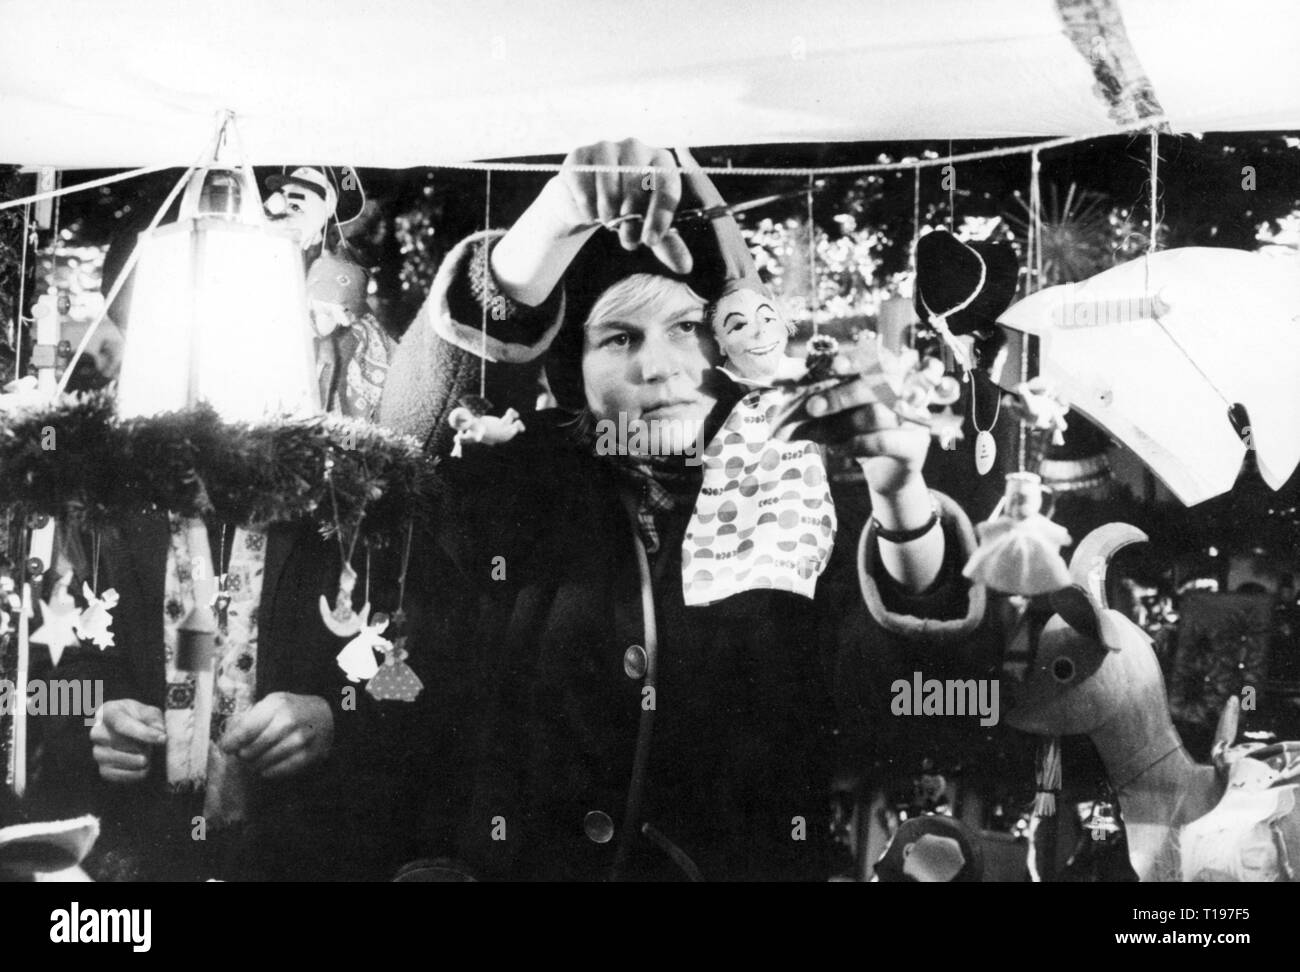 Christmas, Christmas markets, Nuremberg Christmas market, booth with Christmas decoration, December 1963, Additional-Rights-Clearance-Info-Not-Available Stock Photo